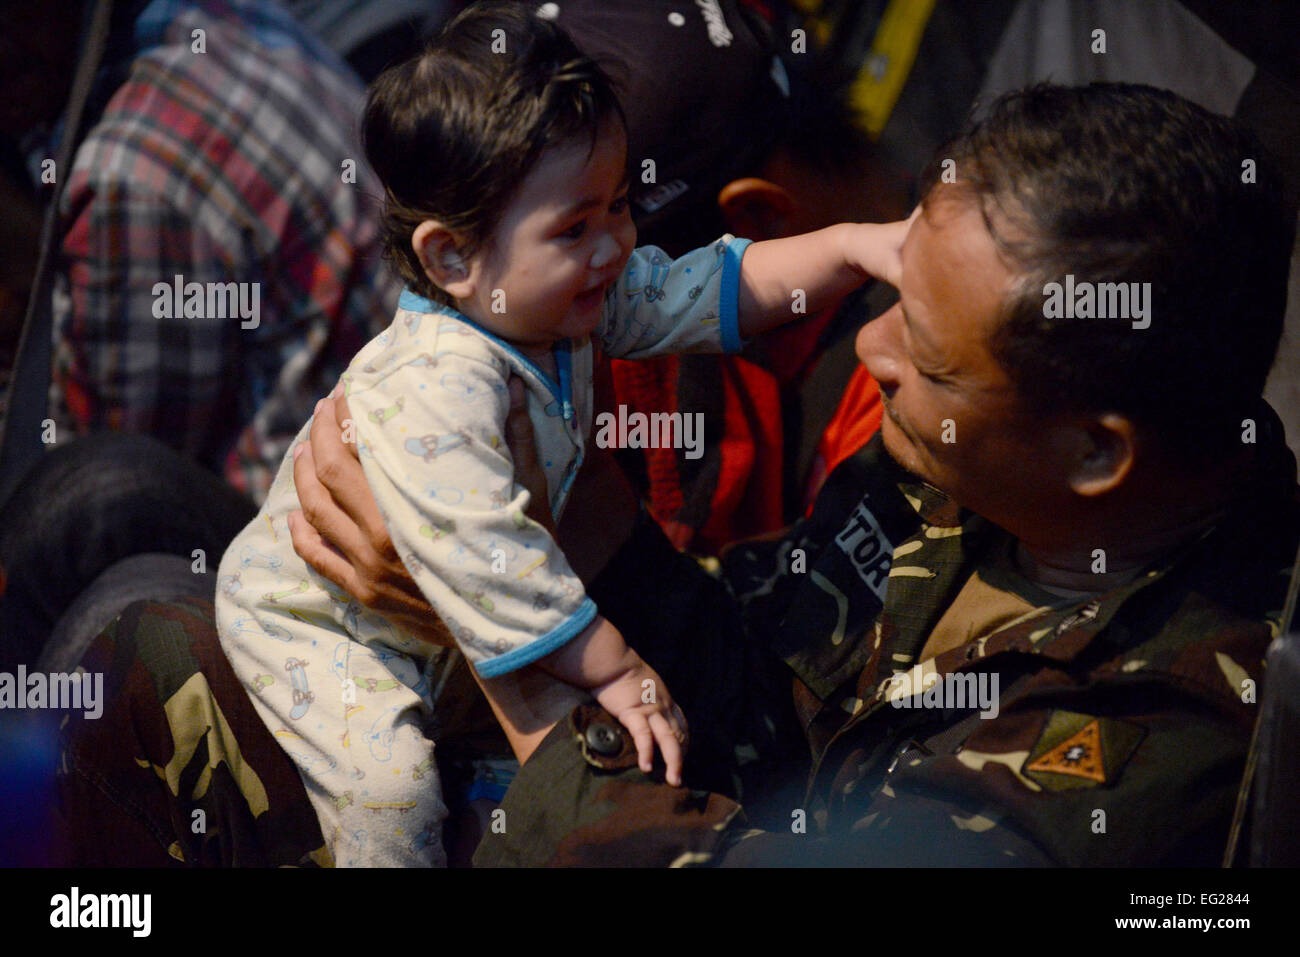 A Philippine Army soldier comforts a baby on a U.S. Air Force C-130H aircraft during an evacuation mission in support of Operation Damayan at Villamor Air Base, Republic of the Philippines, Nov. 19, 2013. Operation Damayan is a humanitarian aid and disaster relief operation led by the Philippine government and supported by a multinational response force.  2nd Lt. Jake Bailey Stock Photo